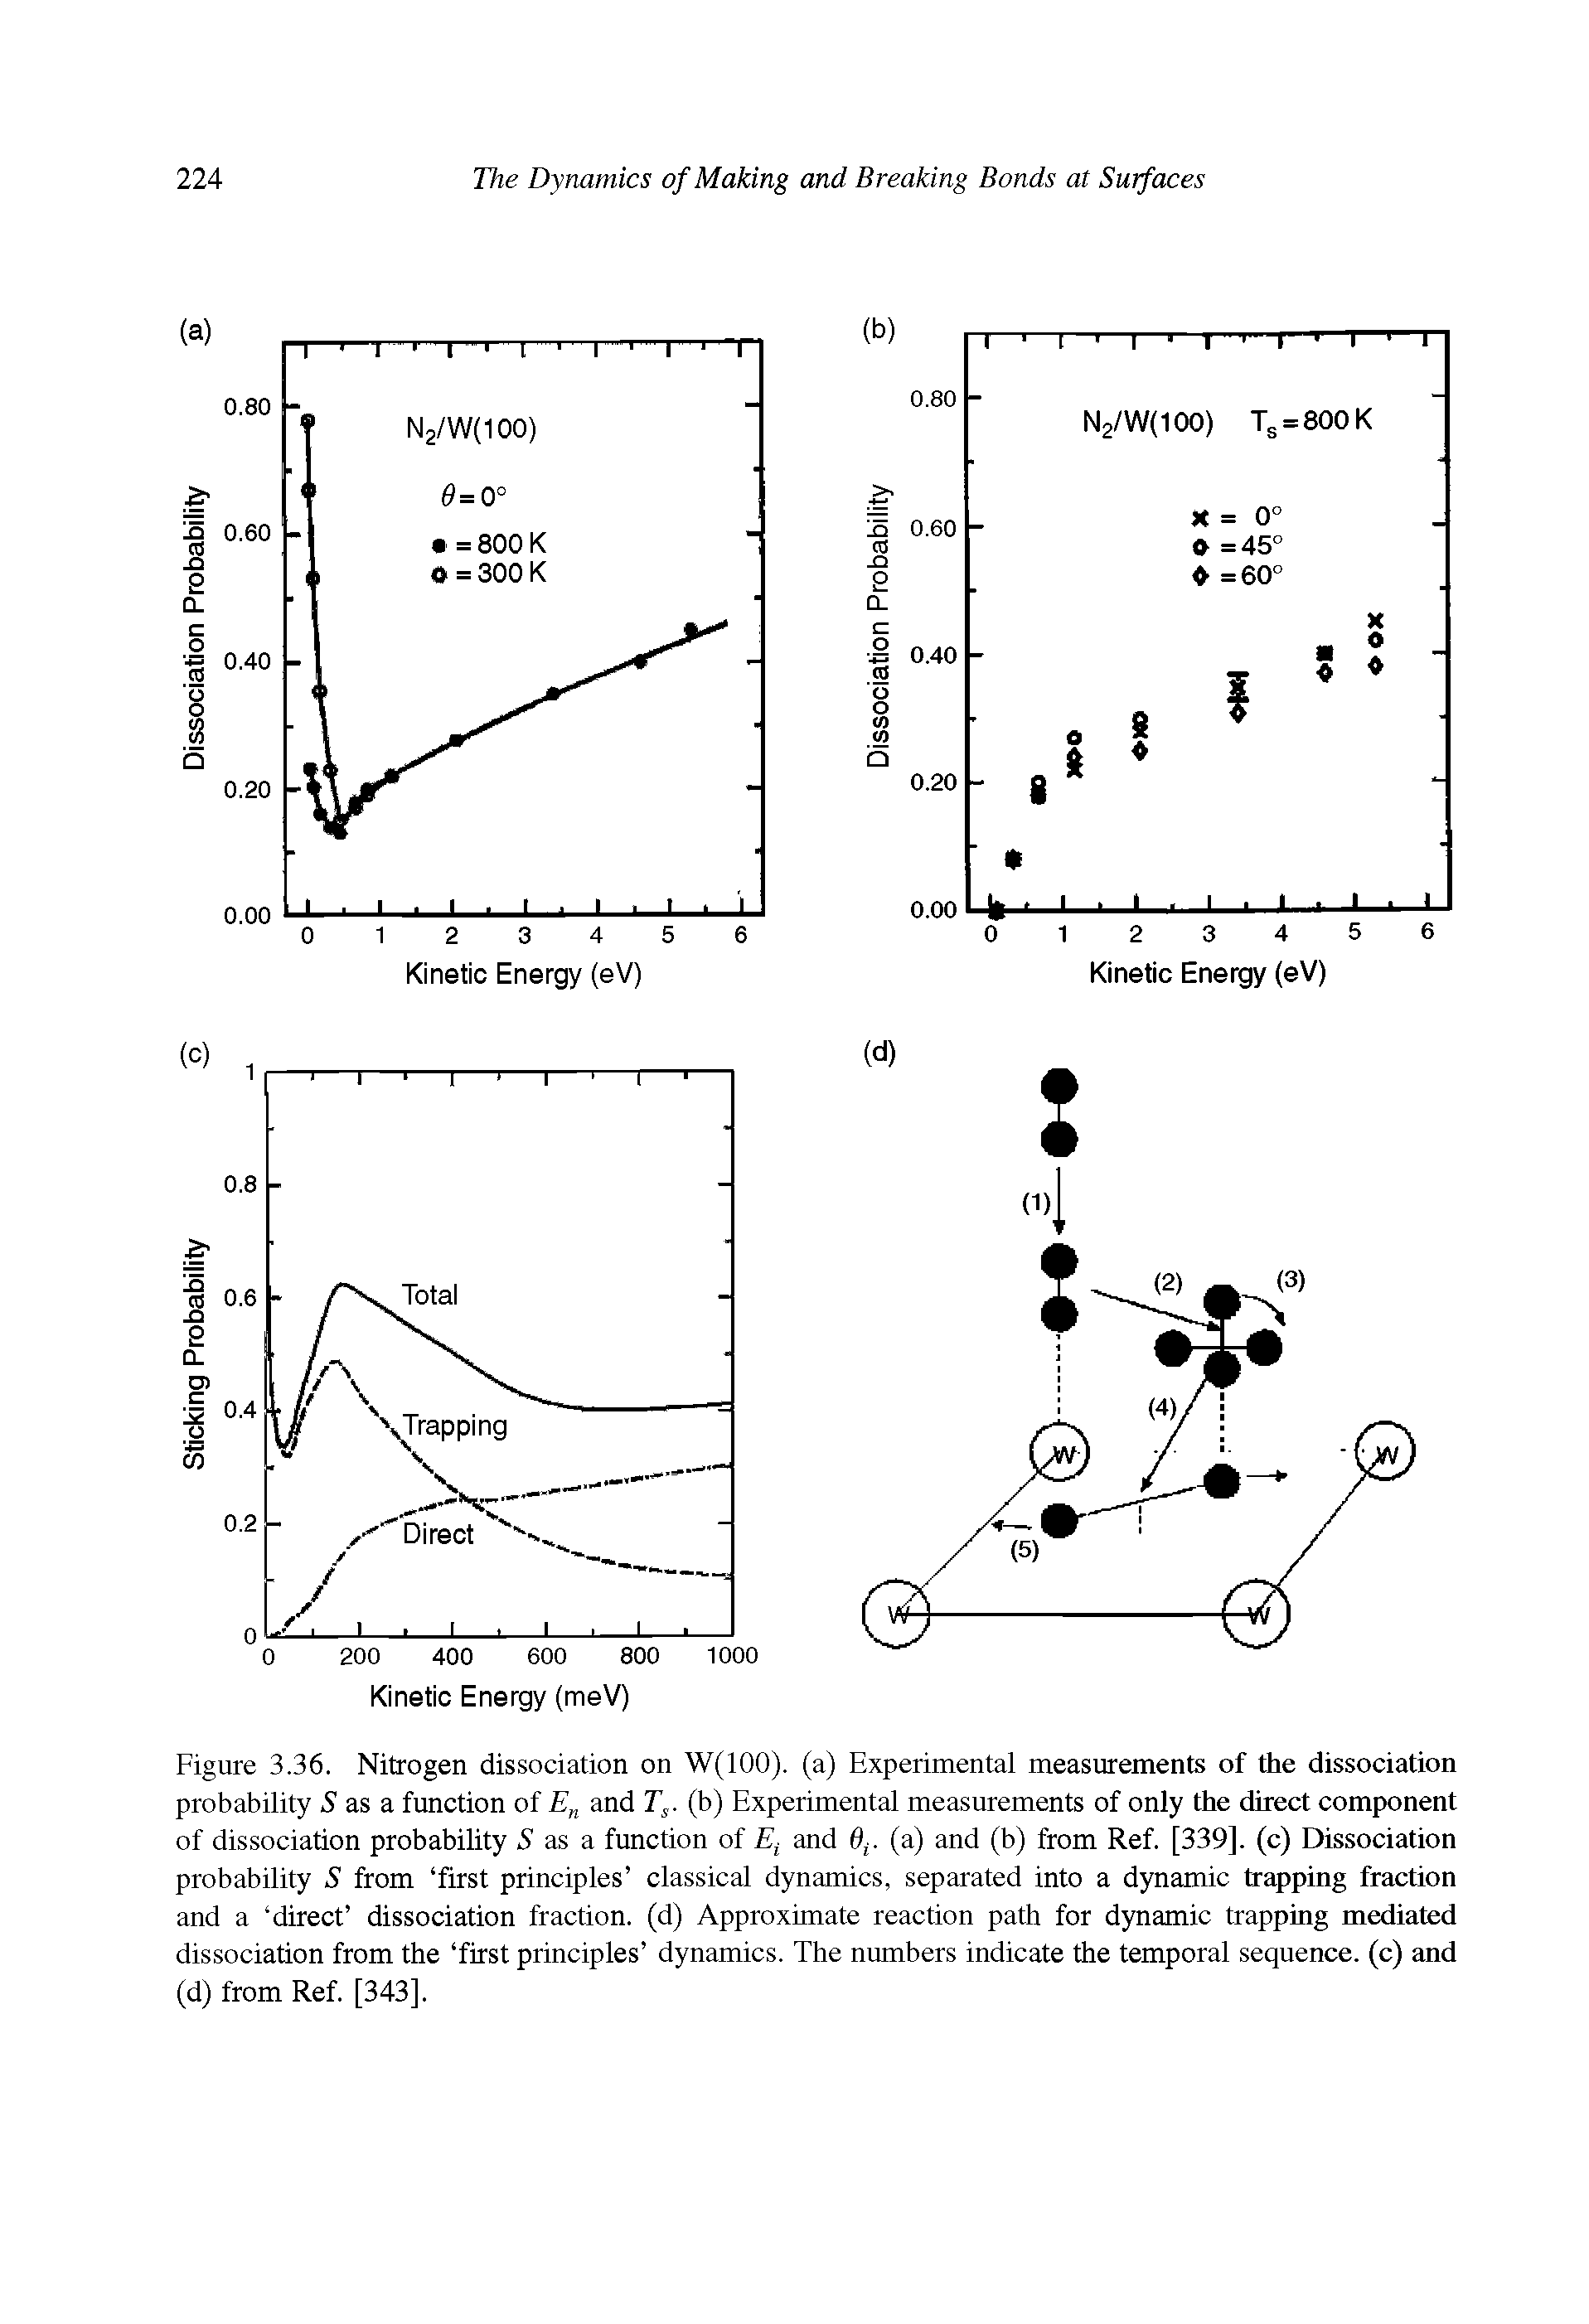 Figure 3.36. Nitrogen dissociation on W(100). (a) Experimental measurements of the dissociation probability S as a function of En and Ts. (b) Experimental measurements of only the direct component of dissociation probability S as a function of Et and 6f. (a) and (b) from Ref. [339]. (c) Dissociation probability S from first principles classical dynamics, separated into a dynamic trapping fraction and a direct dissociation fraction, (d) Approximate reaction path for dynamic trapping mediated dissociation from the first principles dynamics. The numbers indicate the temporal sequence, (c) and (d) from Ref. [343].